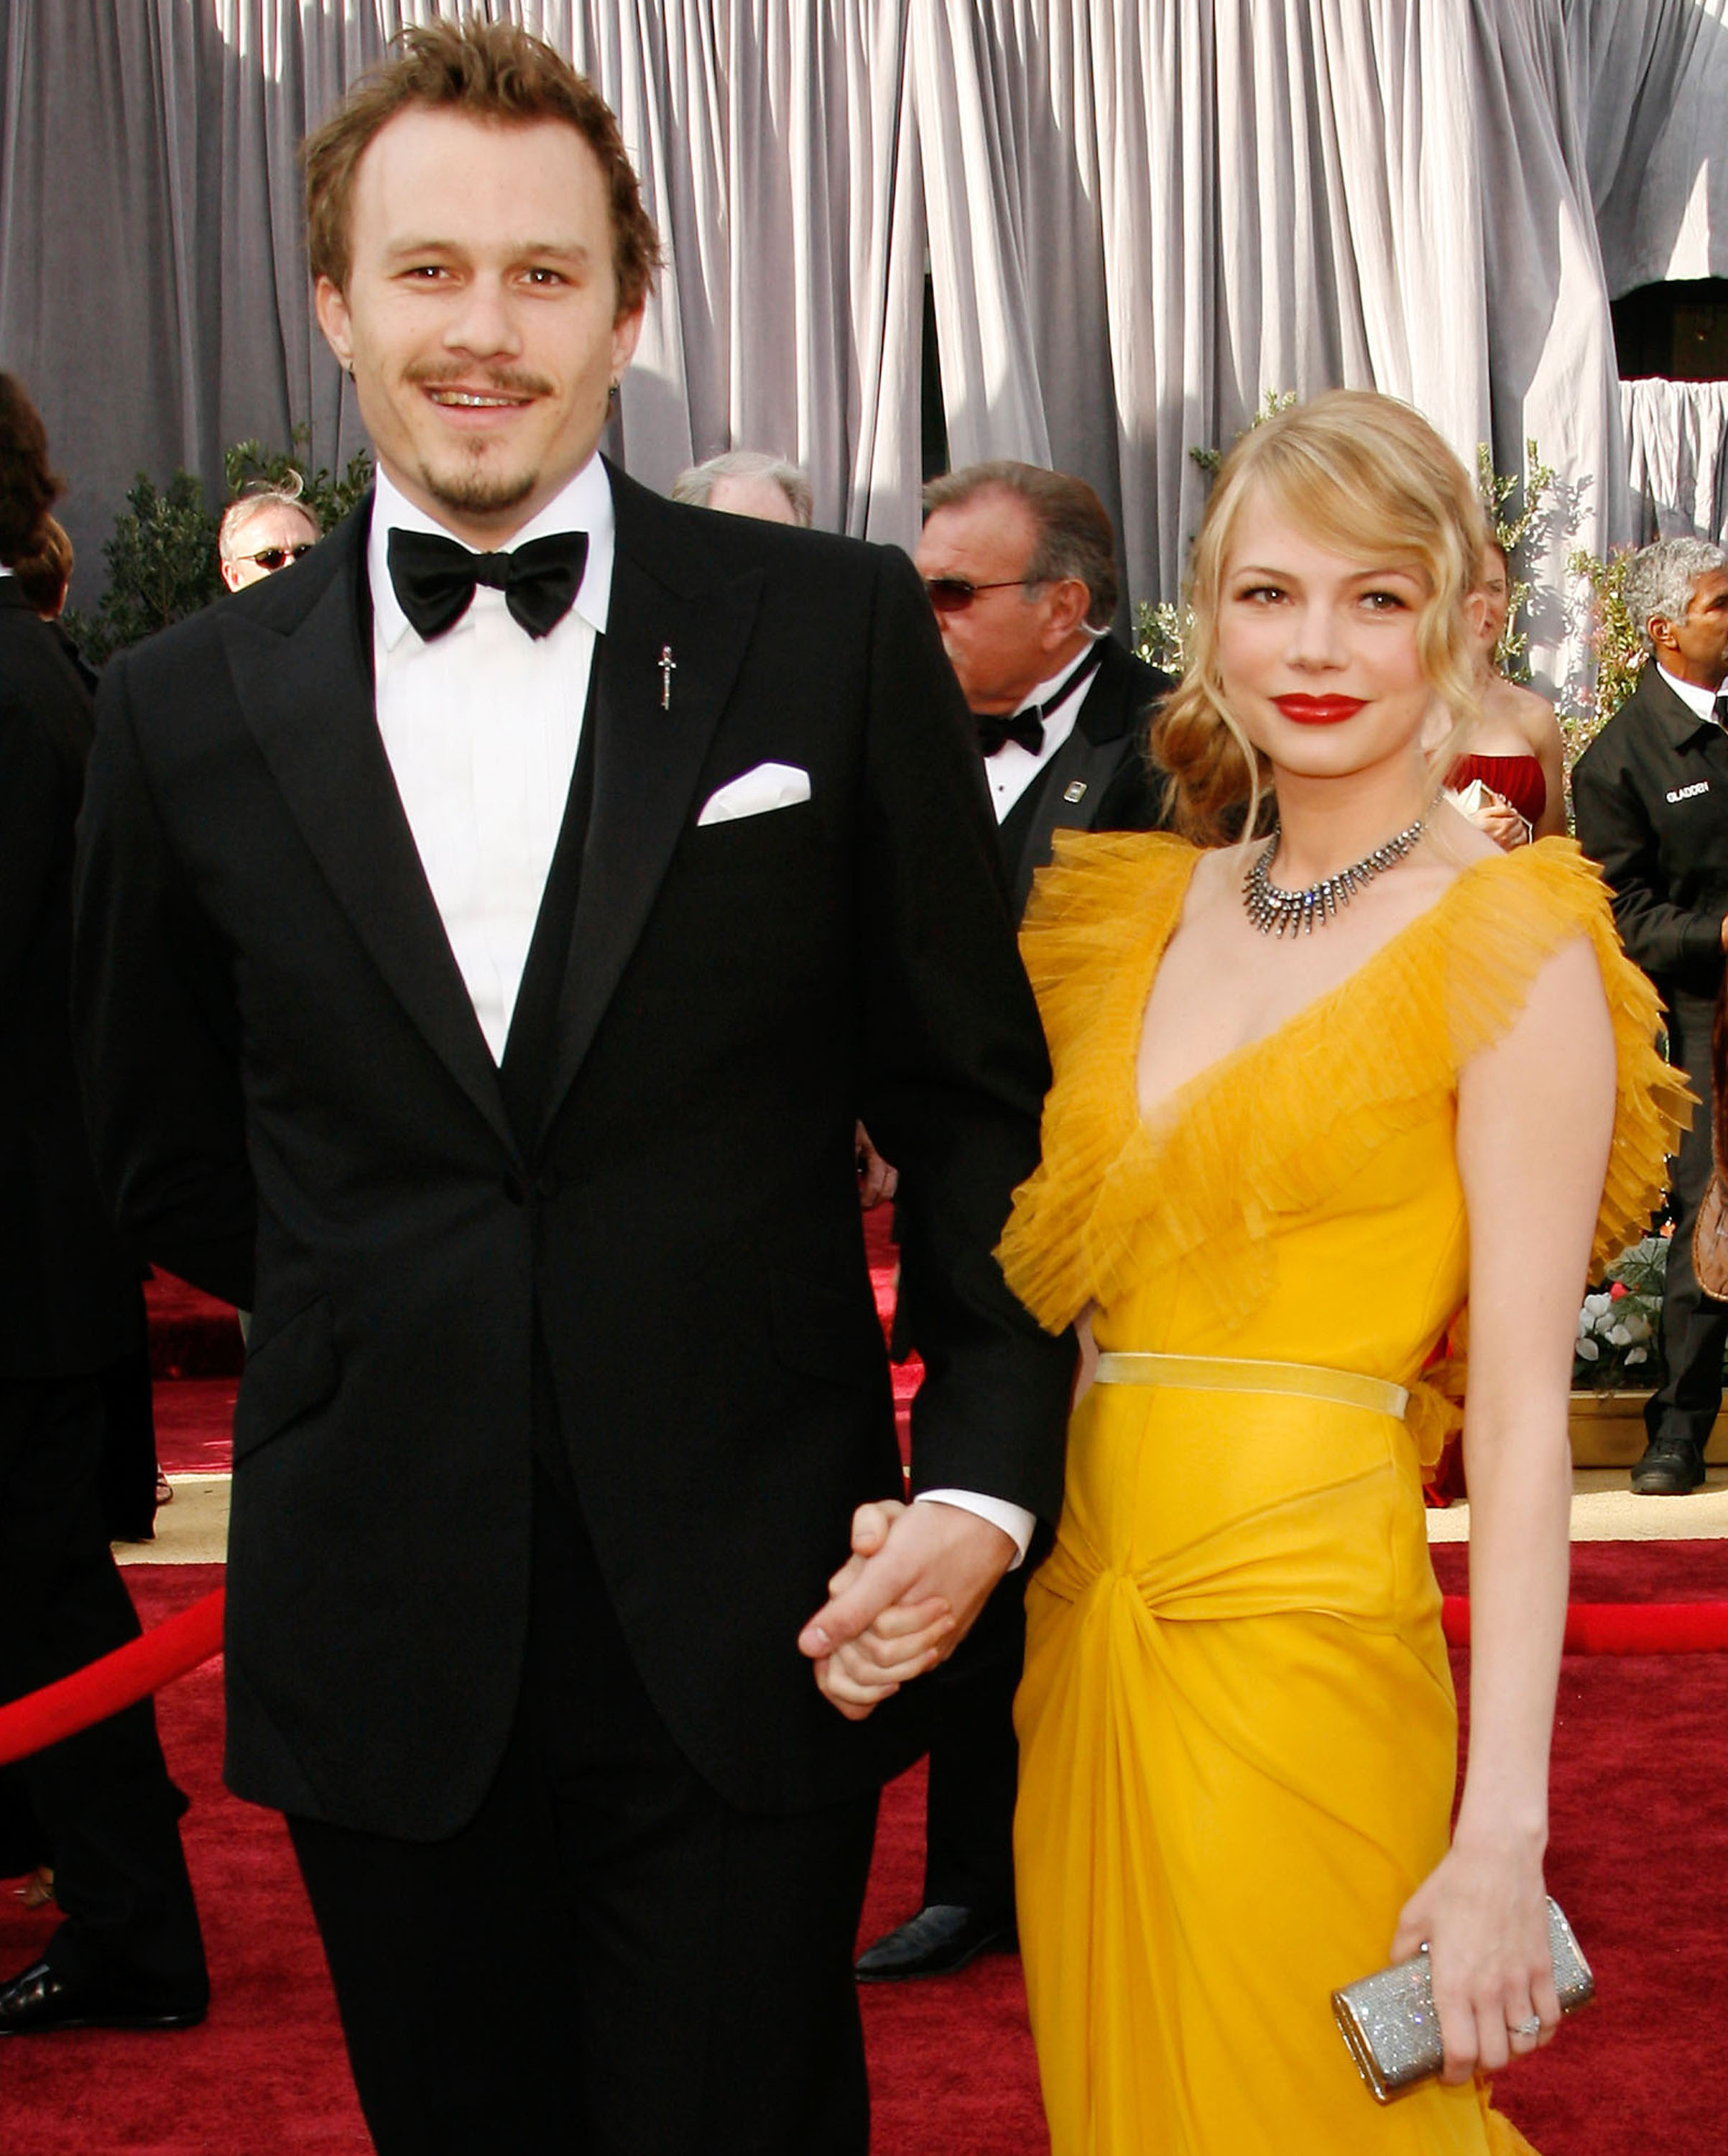 Heath Ledger and Michelle Williams during the The 78th Annual Academy Awards in Hollywood, California | Source: Getty Images